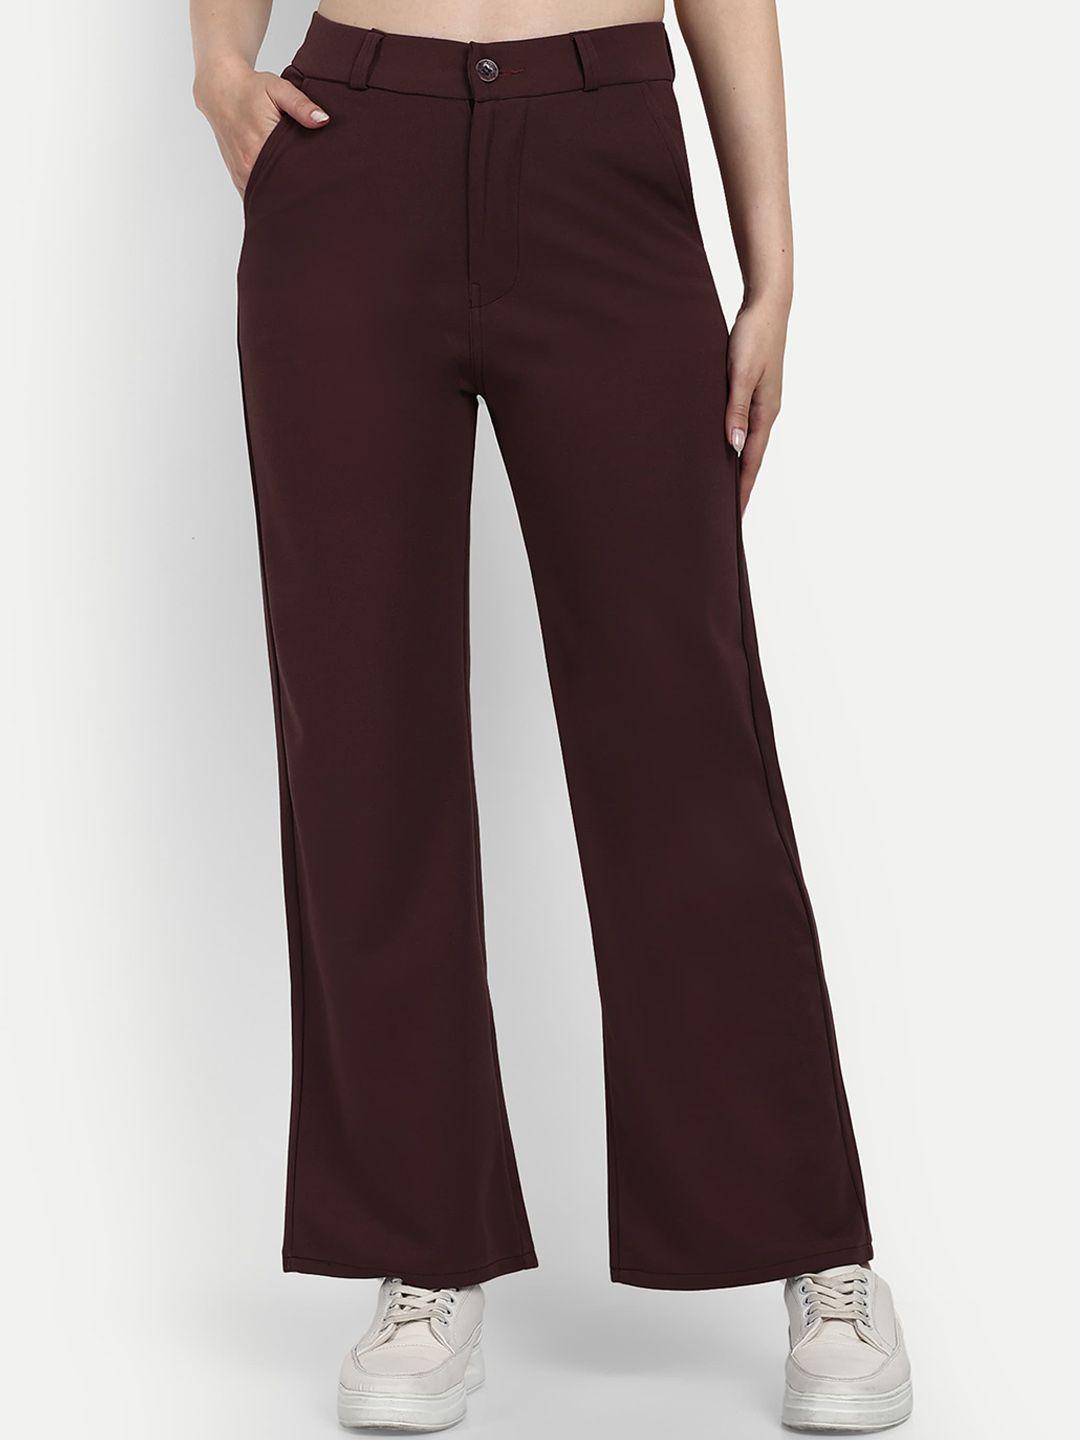 next-one-women-smart-loose-fit-high-rise-easy-wash-stretchable-parallel-trousers